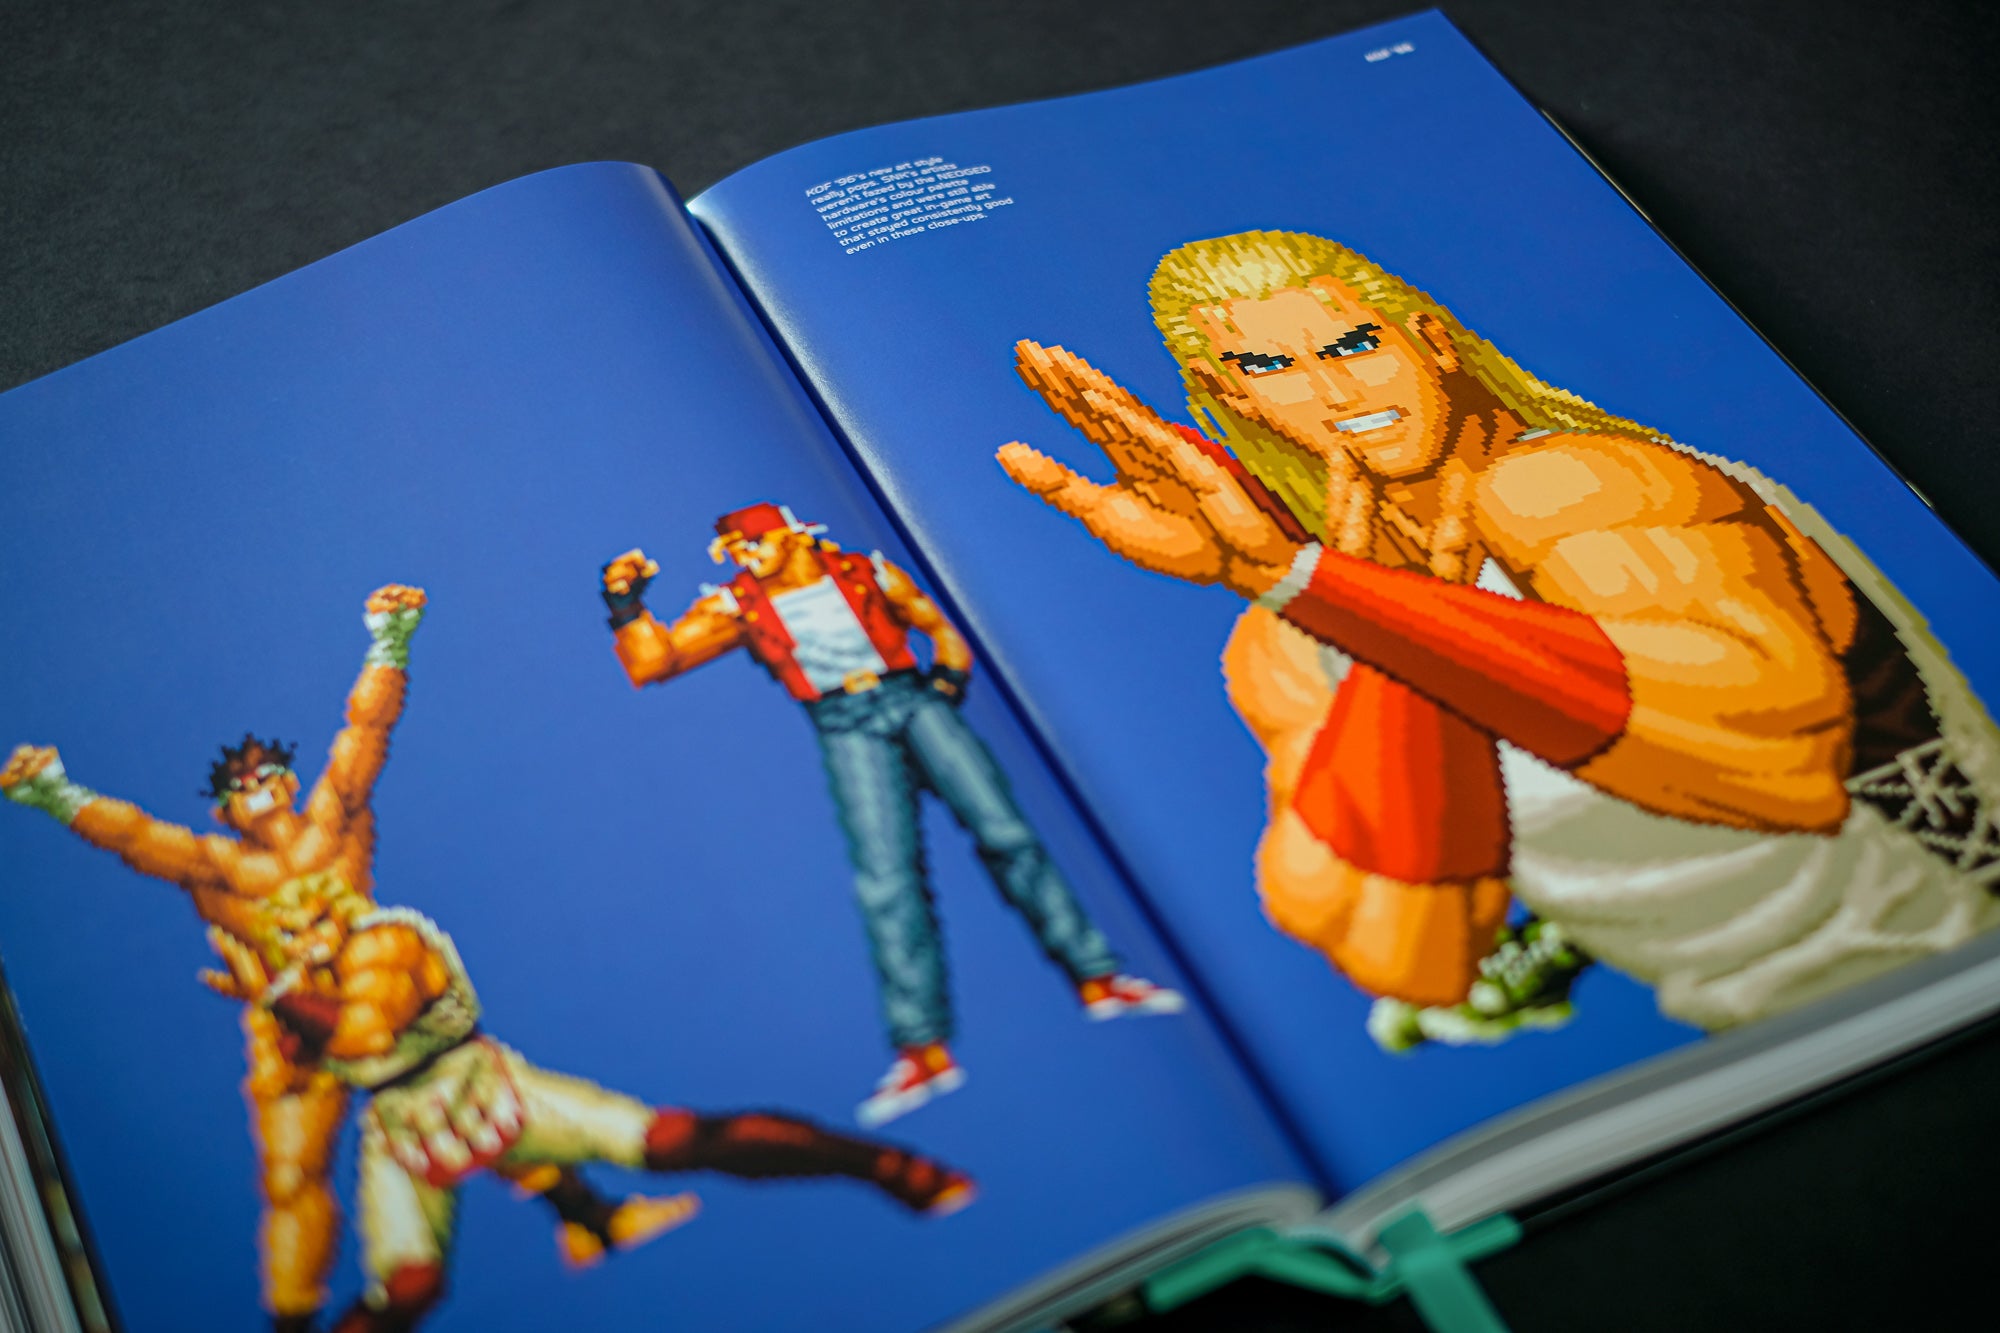 THE KING OF FIGHTERS: The Ultimate History : Bitmap Books: : Books